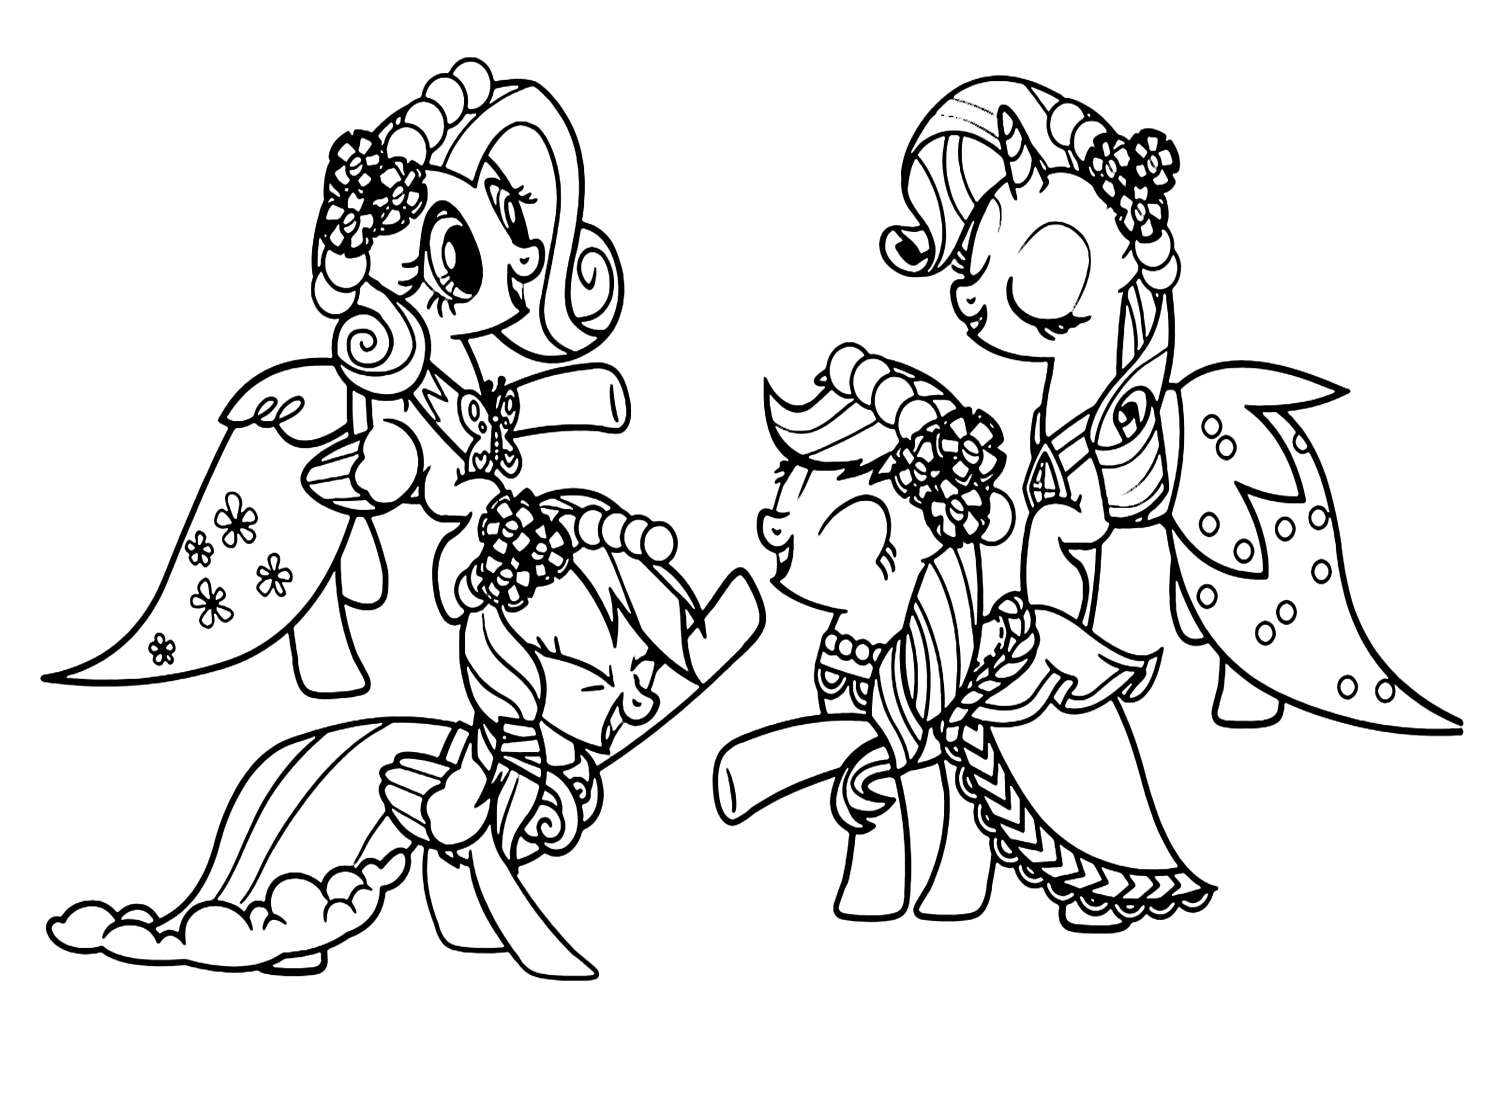 Applejack, Fluttershy, Rainbow Dash, and Rarity Coloring Page